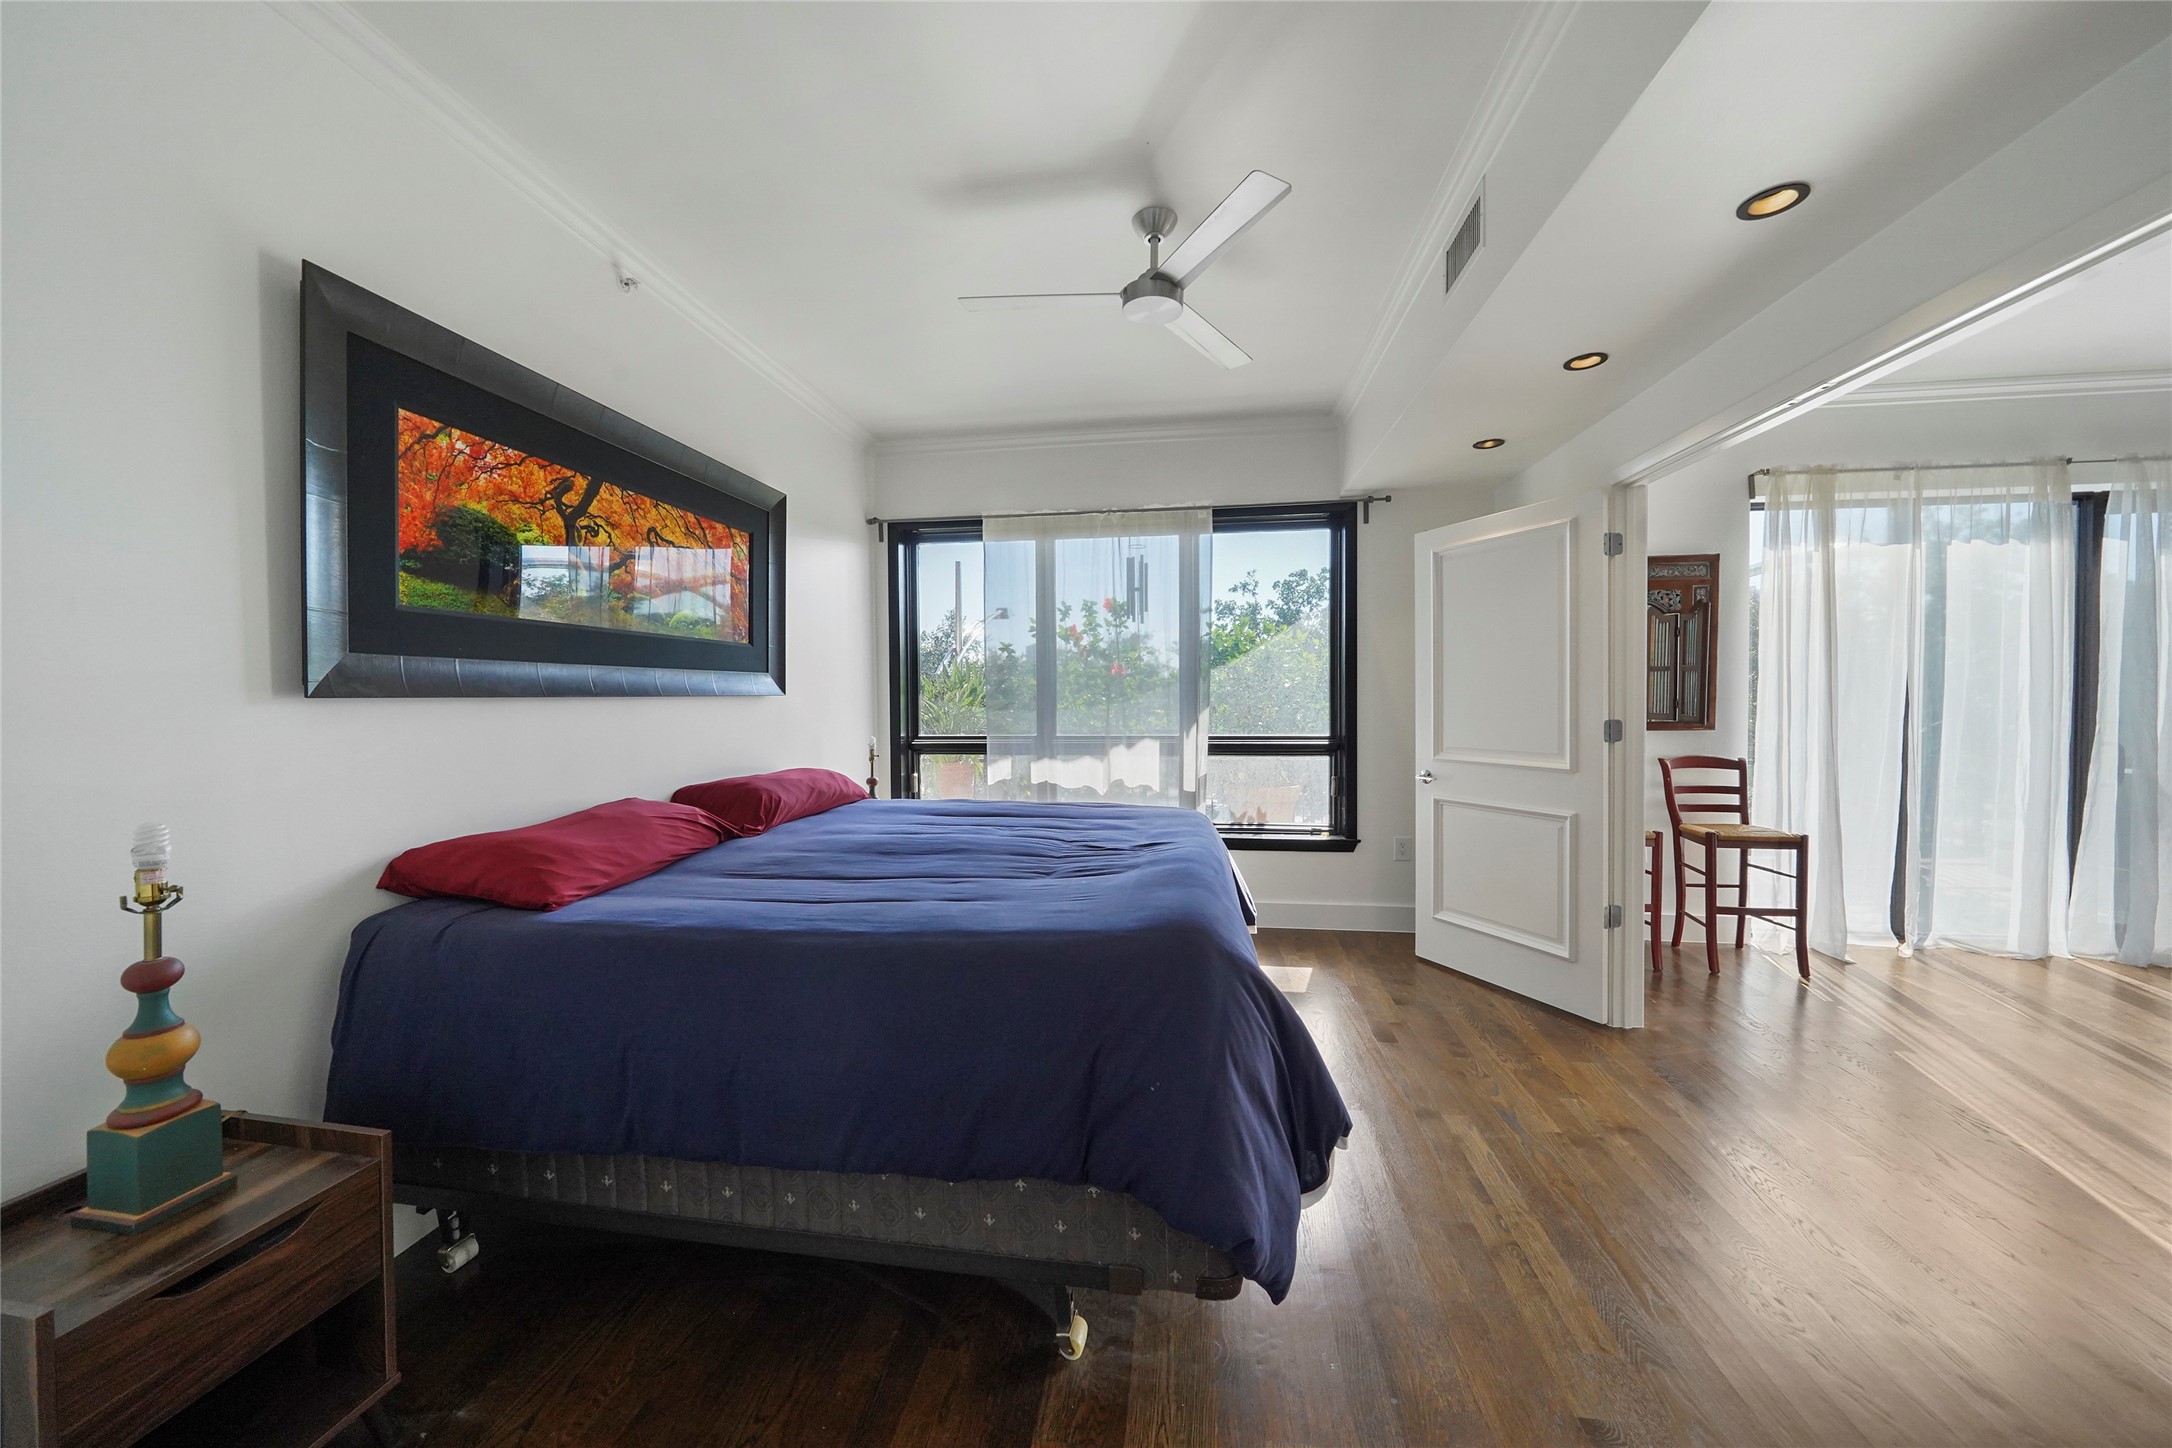 Huge windows in the master bedroom allow ample natural lighting.